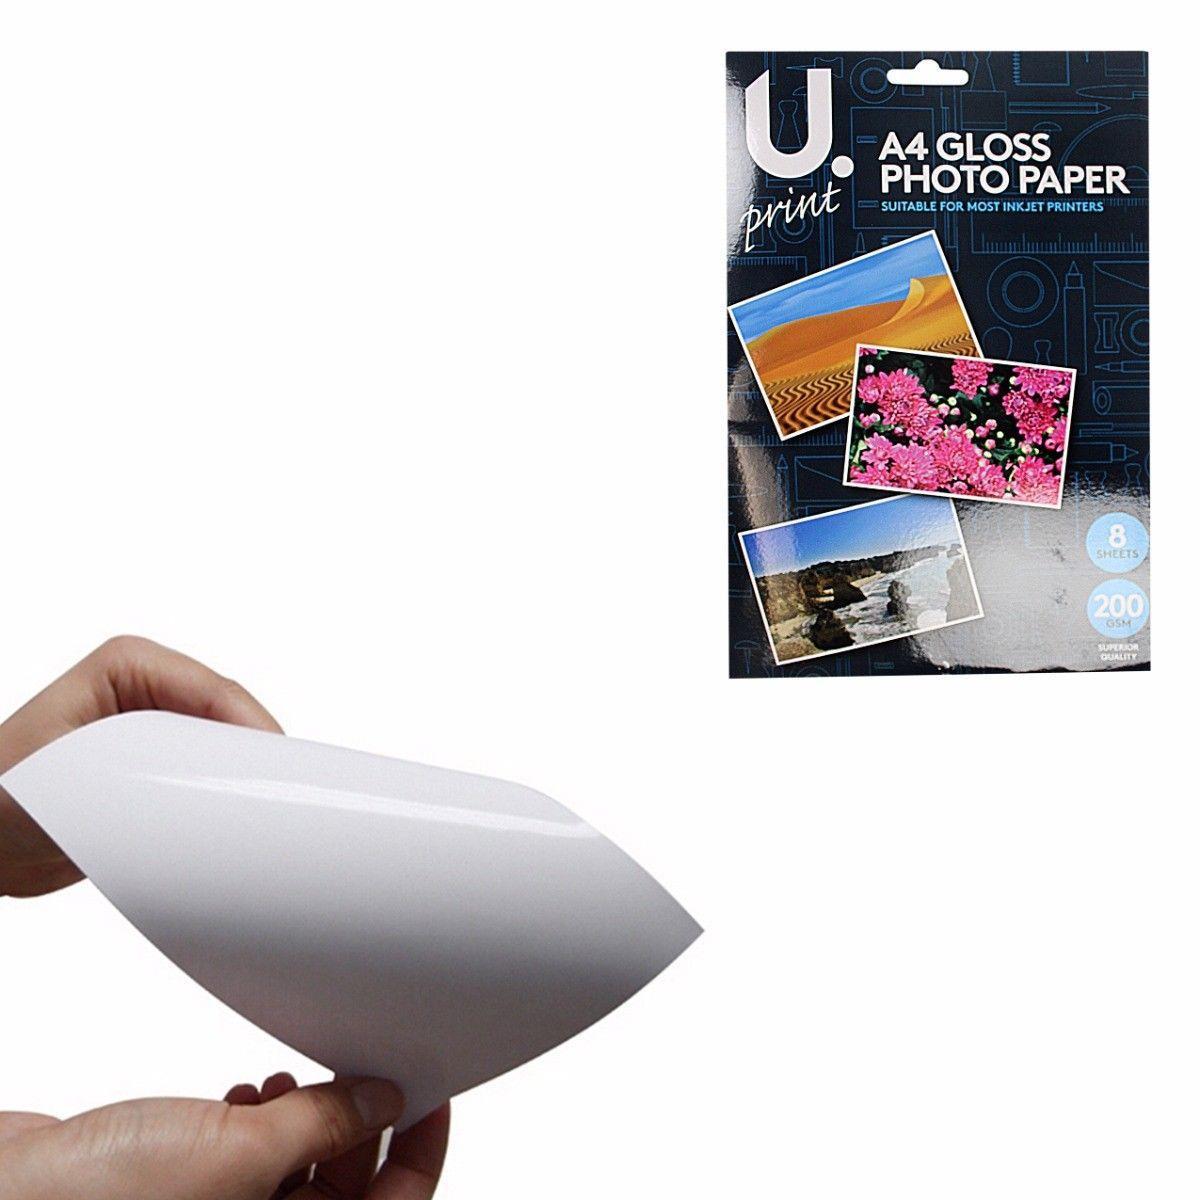 A4 Gloss Photo Paper Includes 8 Sheets 200GSM Superior Quality P2379 (Large Letter Rate)